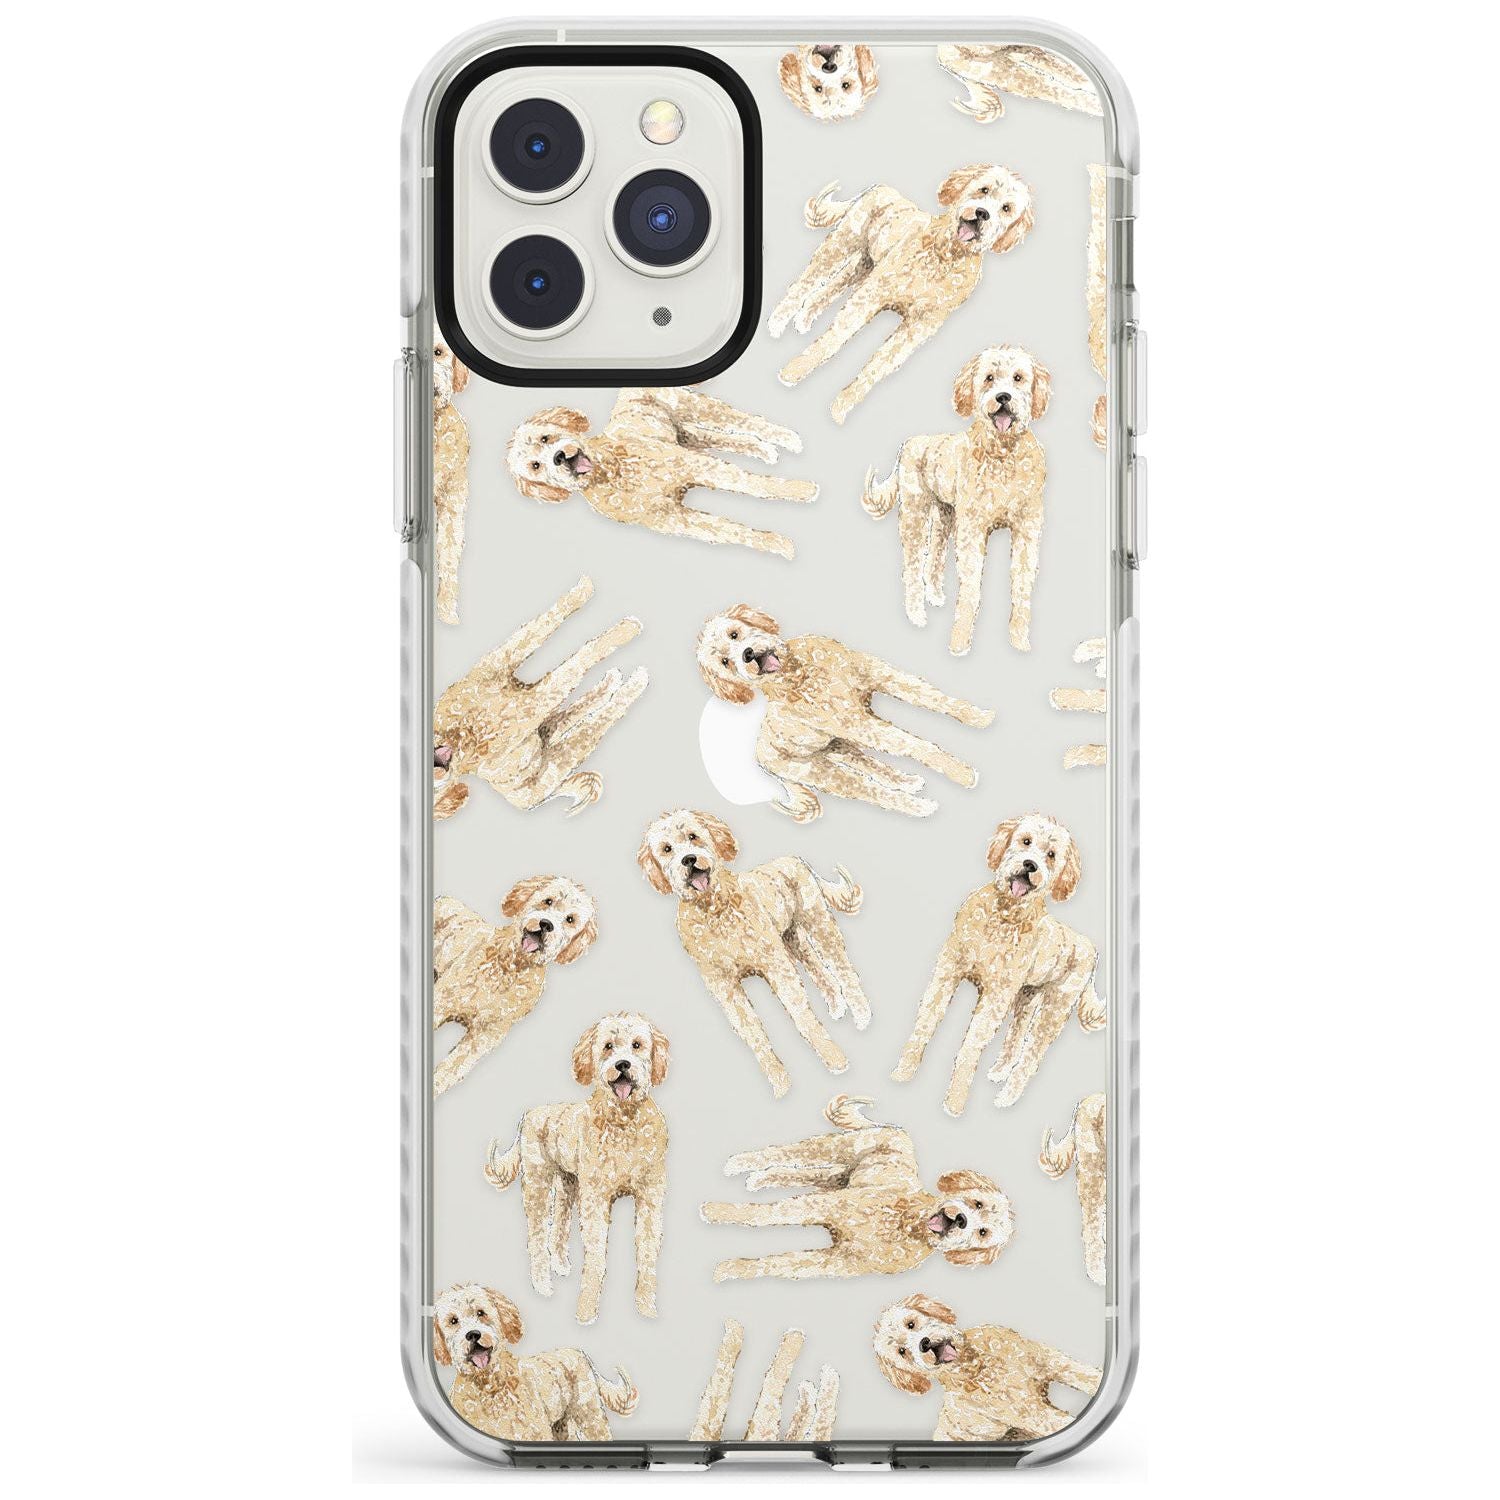 Goldendoodle Watercolour Dog Pattern Impact Phone Case for iPhone 11 Pro Max